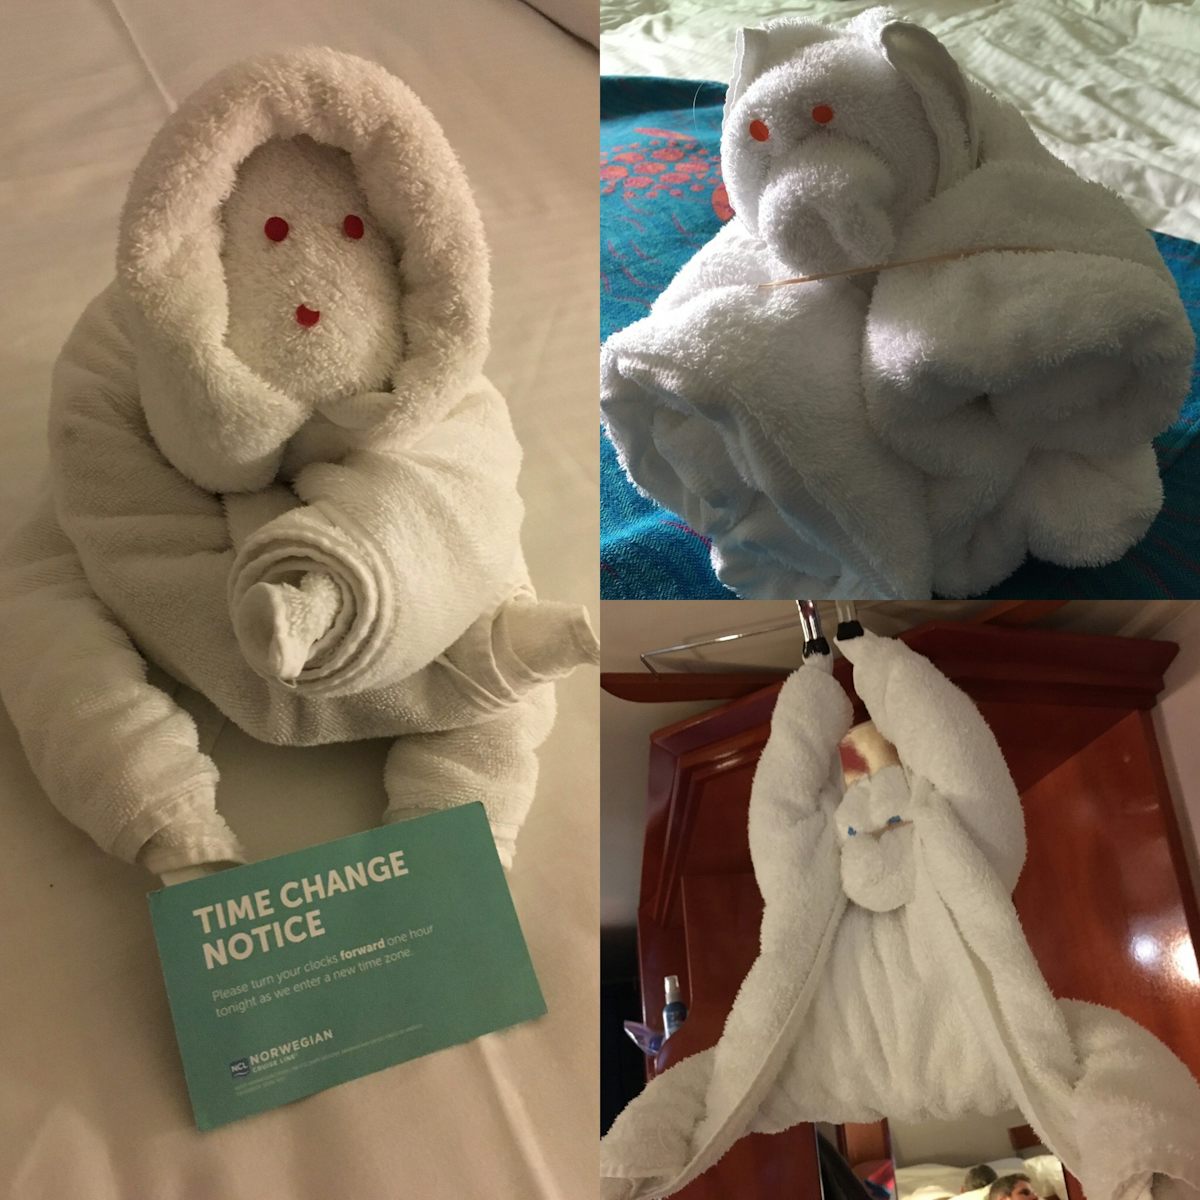 Our favorite towel animals